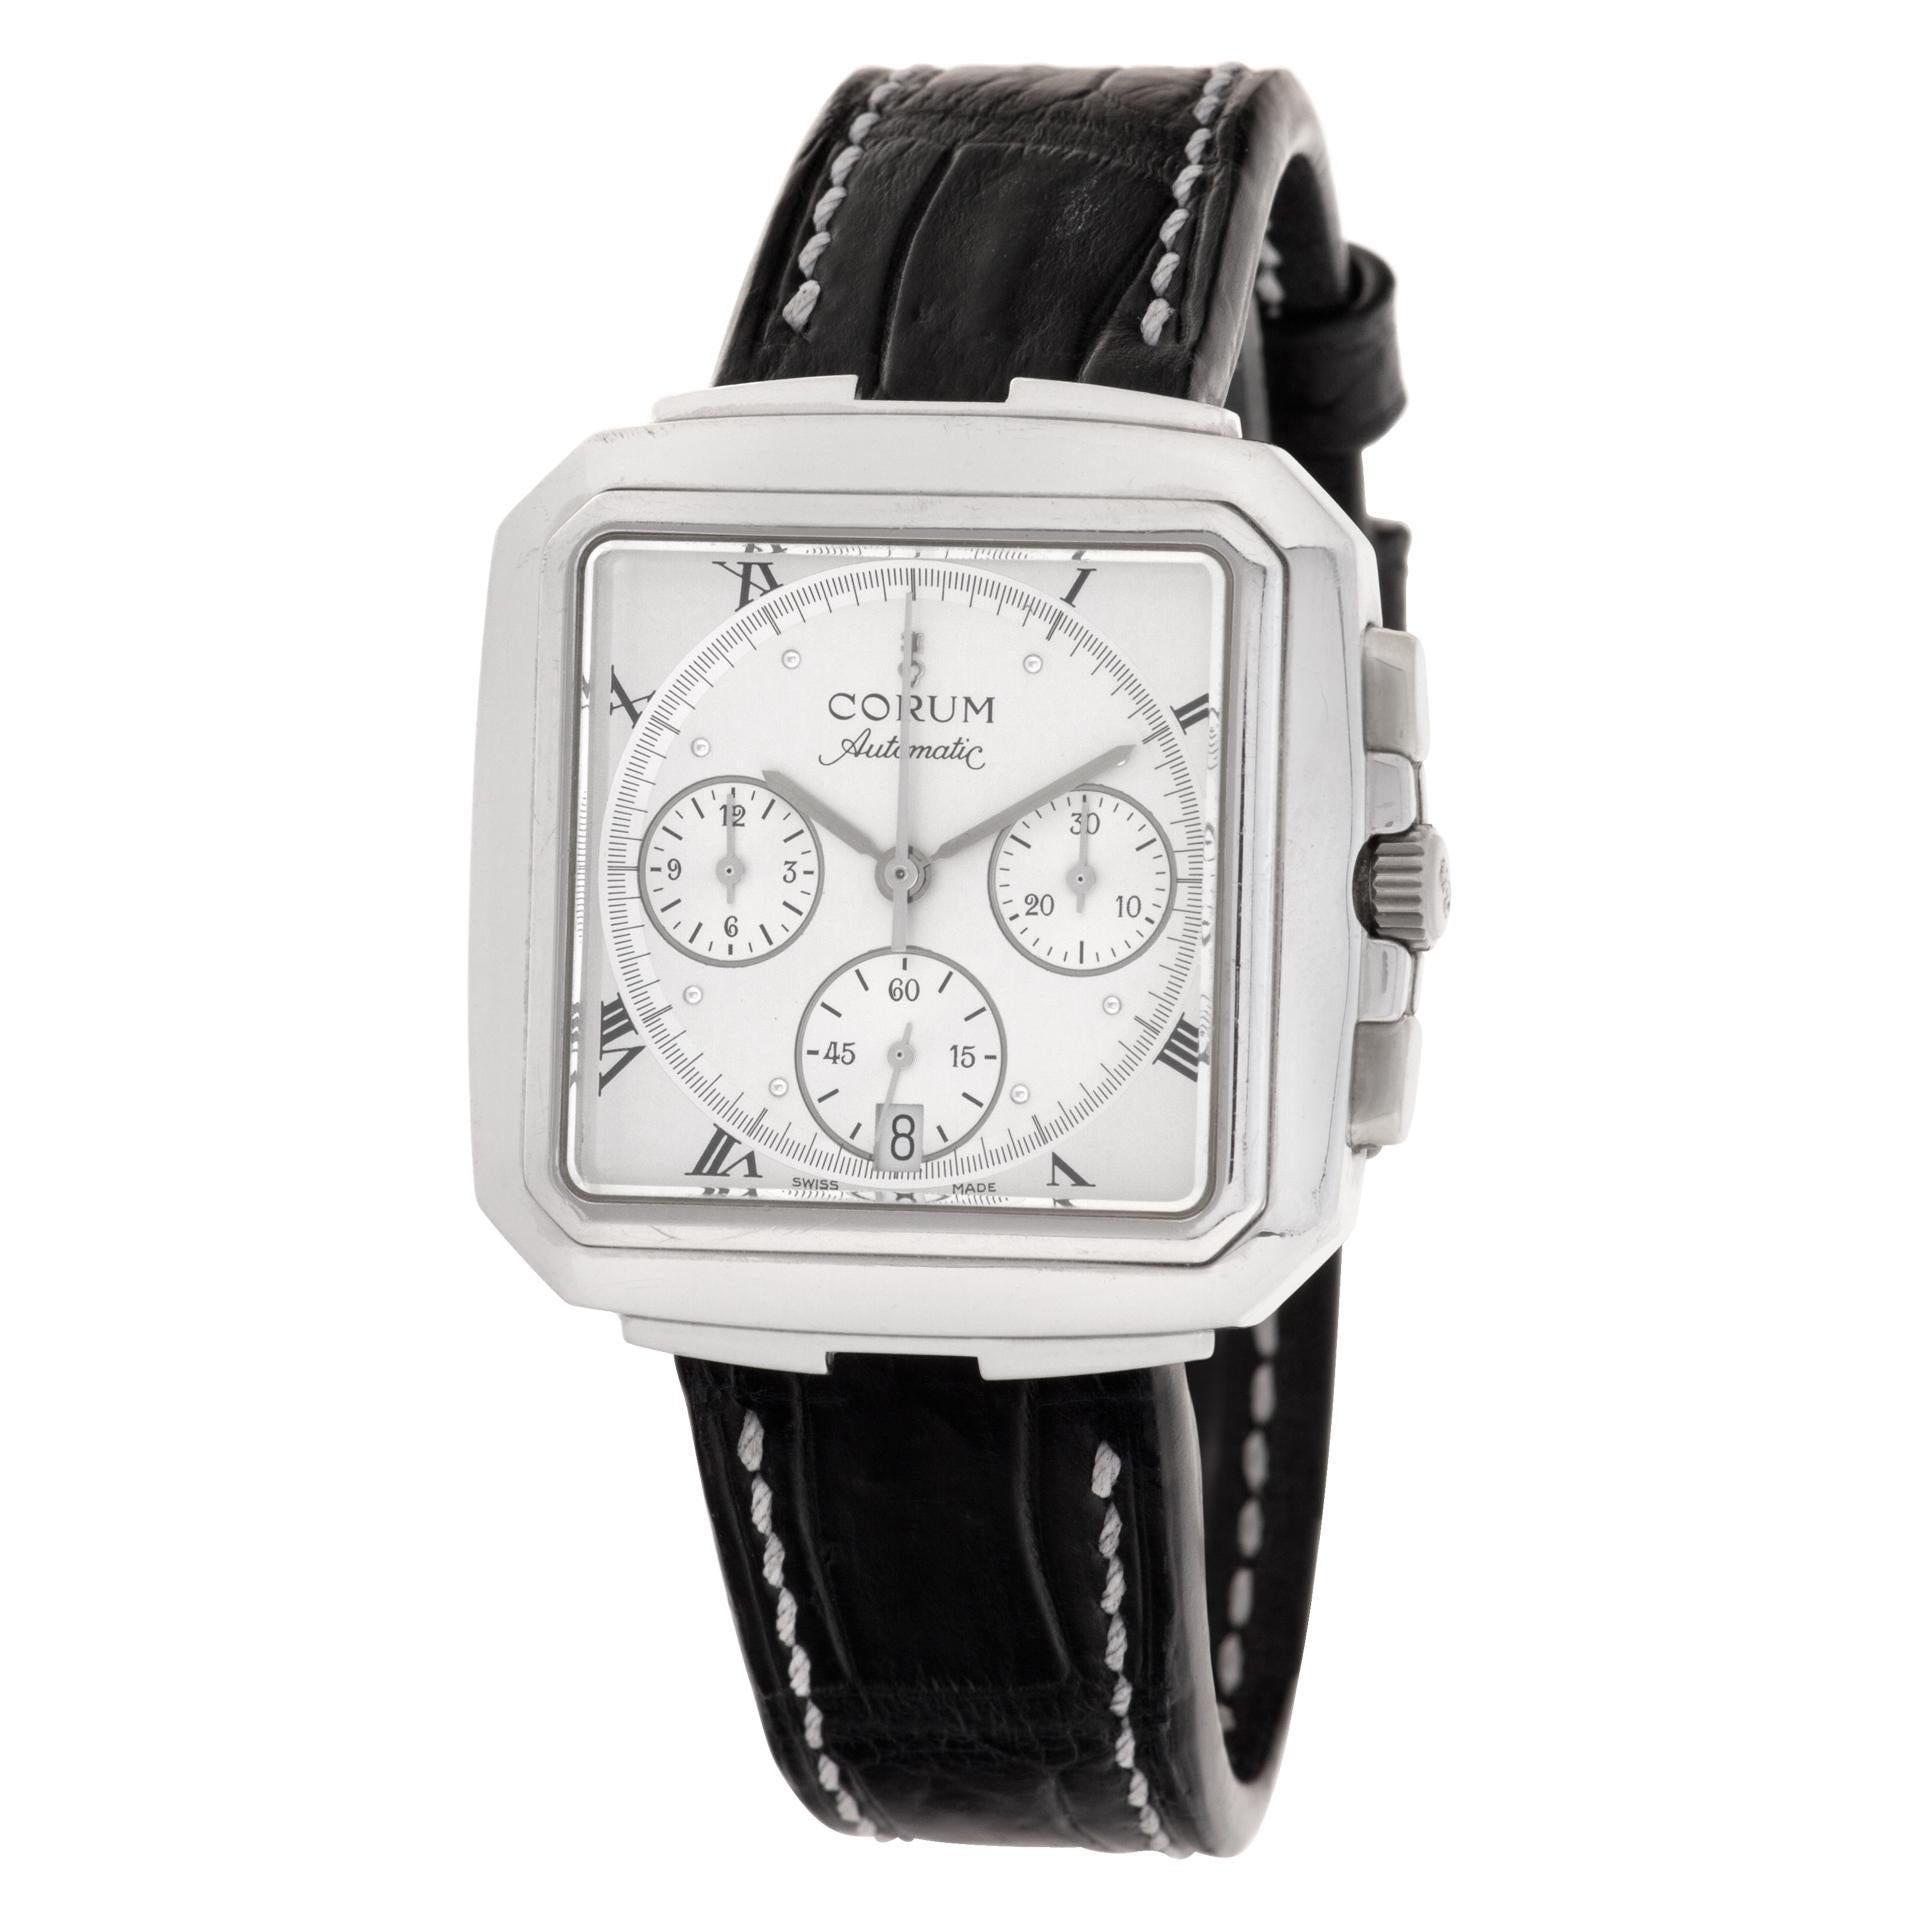 Corum Square Chronograph in platinum on leather strap with original Corum platinum tang buckle. Auto w/ subseconds, date and chronograph. 35.5 mm case size. Ref 296.121.70. Circa 2010s. Fine Pre-owned Corum Watch.  Certified preowned Sport Corum